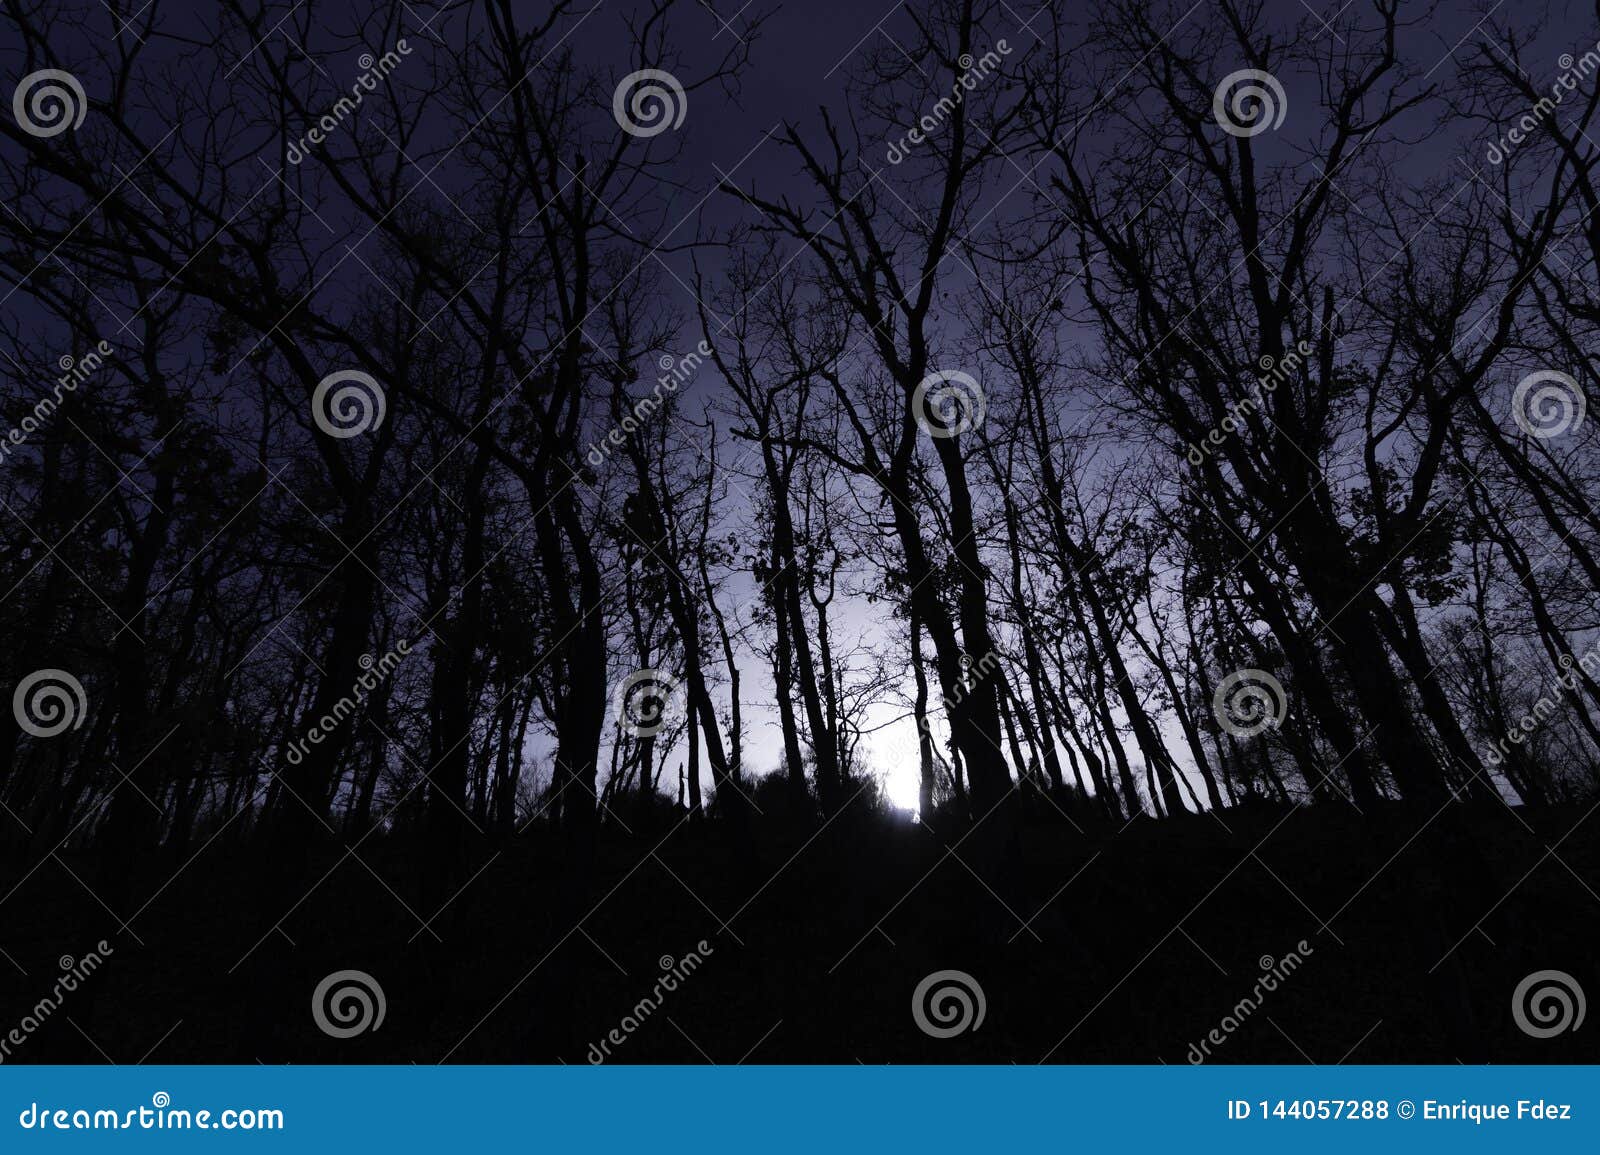 the night falls on the dark and mysterious forest